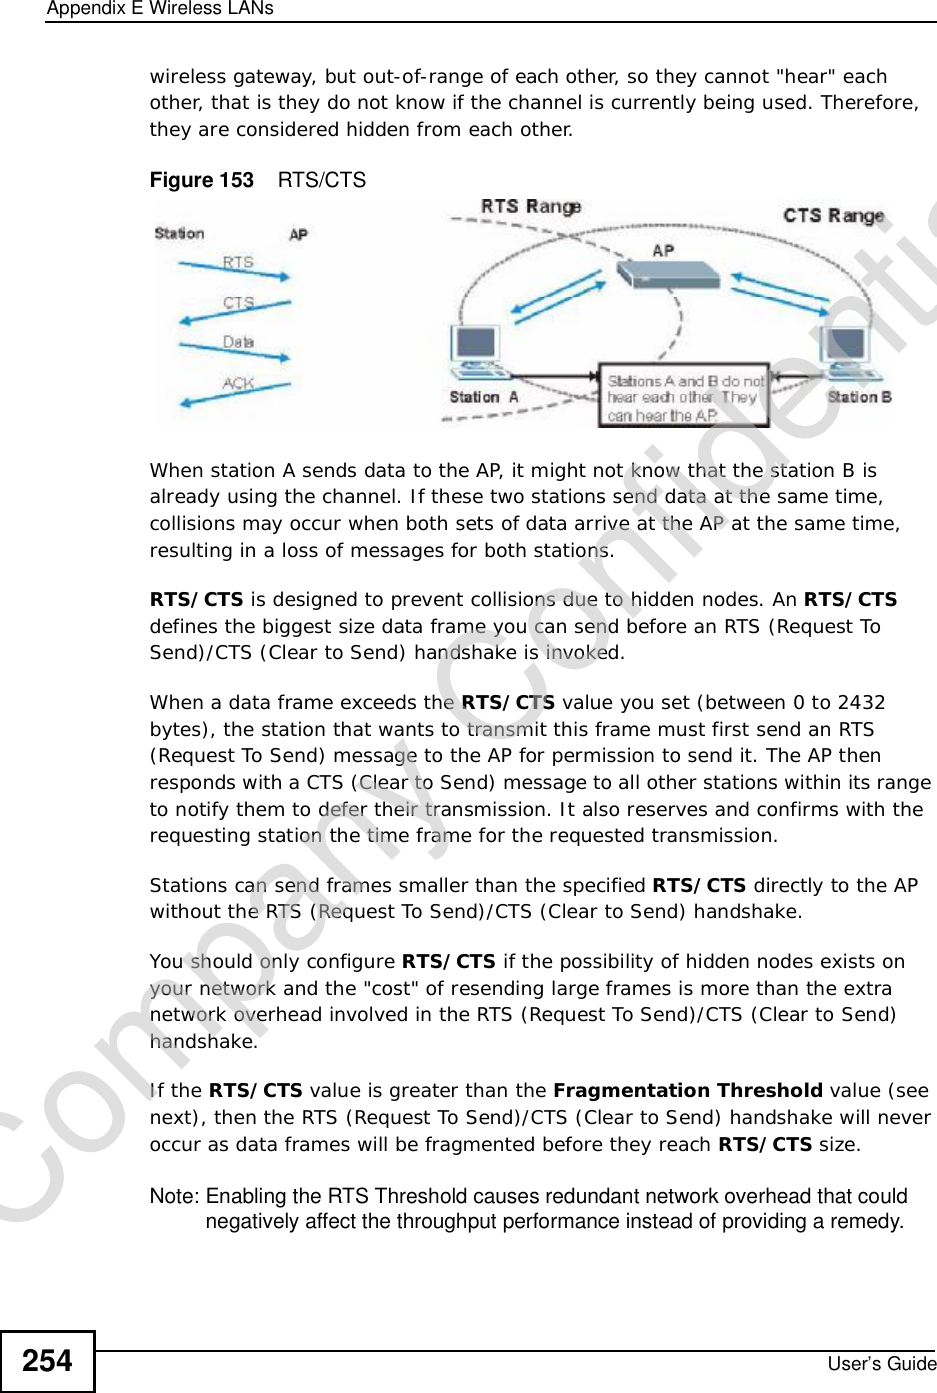 Appendix EWireless LANsUser’s Guide254wireless gateway, but out-of-range of each other, so they cannot &quot;hear&quot; each other, that is they do not know if the channel is currently being used. Therefore, they are considered hidden from each other. Figure 153    RTS/CTSWhen station A sends data to the AP, it might not know that the station B is already using the channel. If these two stations send data at the same time, collisions may occur when both sets of data arrive at the AP at the same time, resulting in a loss of messages for both stations.RTS/CTS is designed to prevent collisions due to hidden nodes. An RTS/CTS defines the biggest size data frame you can send before an RTS (Request To Send)/CTS (Clear to Send) handshake is invoked.When a data frame exceeds the RTS/CTS value you set (between 0 to 2432 bytes), the station that wants to transmit this frame must first send an RTS (Request To Send) message to the AP for permission to send it. The AP then responds with a CTS (Clear to Send) message to all other stations within its range to notify them to defer their transmission. It also reserves and confirms with the requesting station the time frame for the requested transmission.Stations can send frames smaller than the specified RTS/CTS directly to the AP without the RTS (Request To Send)/CTS (Clear to Send) handshake. You should only configure RTS/CTS if the possibility of hidden nodes exists on your network and the &quot;cost&quot; of resending large frames is more than the extra network overhead involved in the RTS (Request To Send)/CTS (Clear to Send) handshake. If the RTS/CTS value is greater than the Fragmentation Threshold value (see next), then the RTS (Request To Send)/CTS (Clear to Send) handshake will never occur as data frames will be fragmented before they reach RTS/CTS size. Note: Enabling the RTS Threshold causes redundant network overhead that could negatively affect the throughput performance instead of providing a remedy.Company Confidential